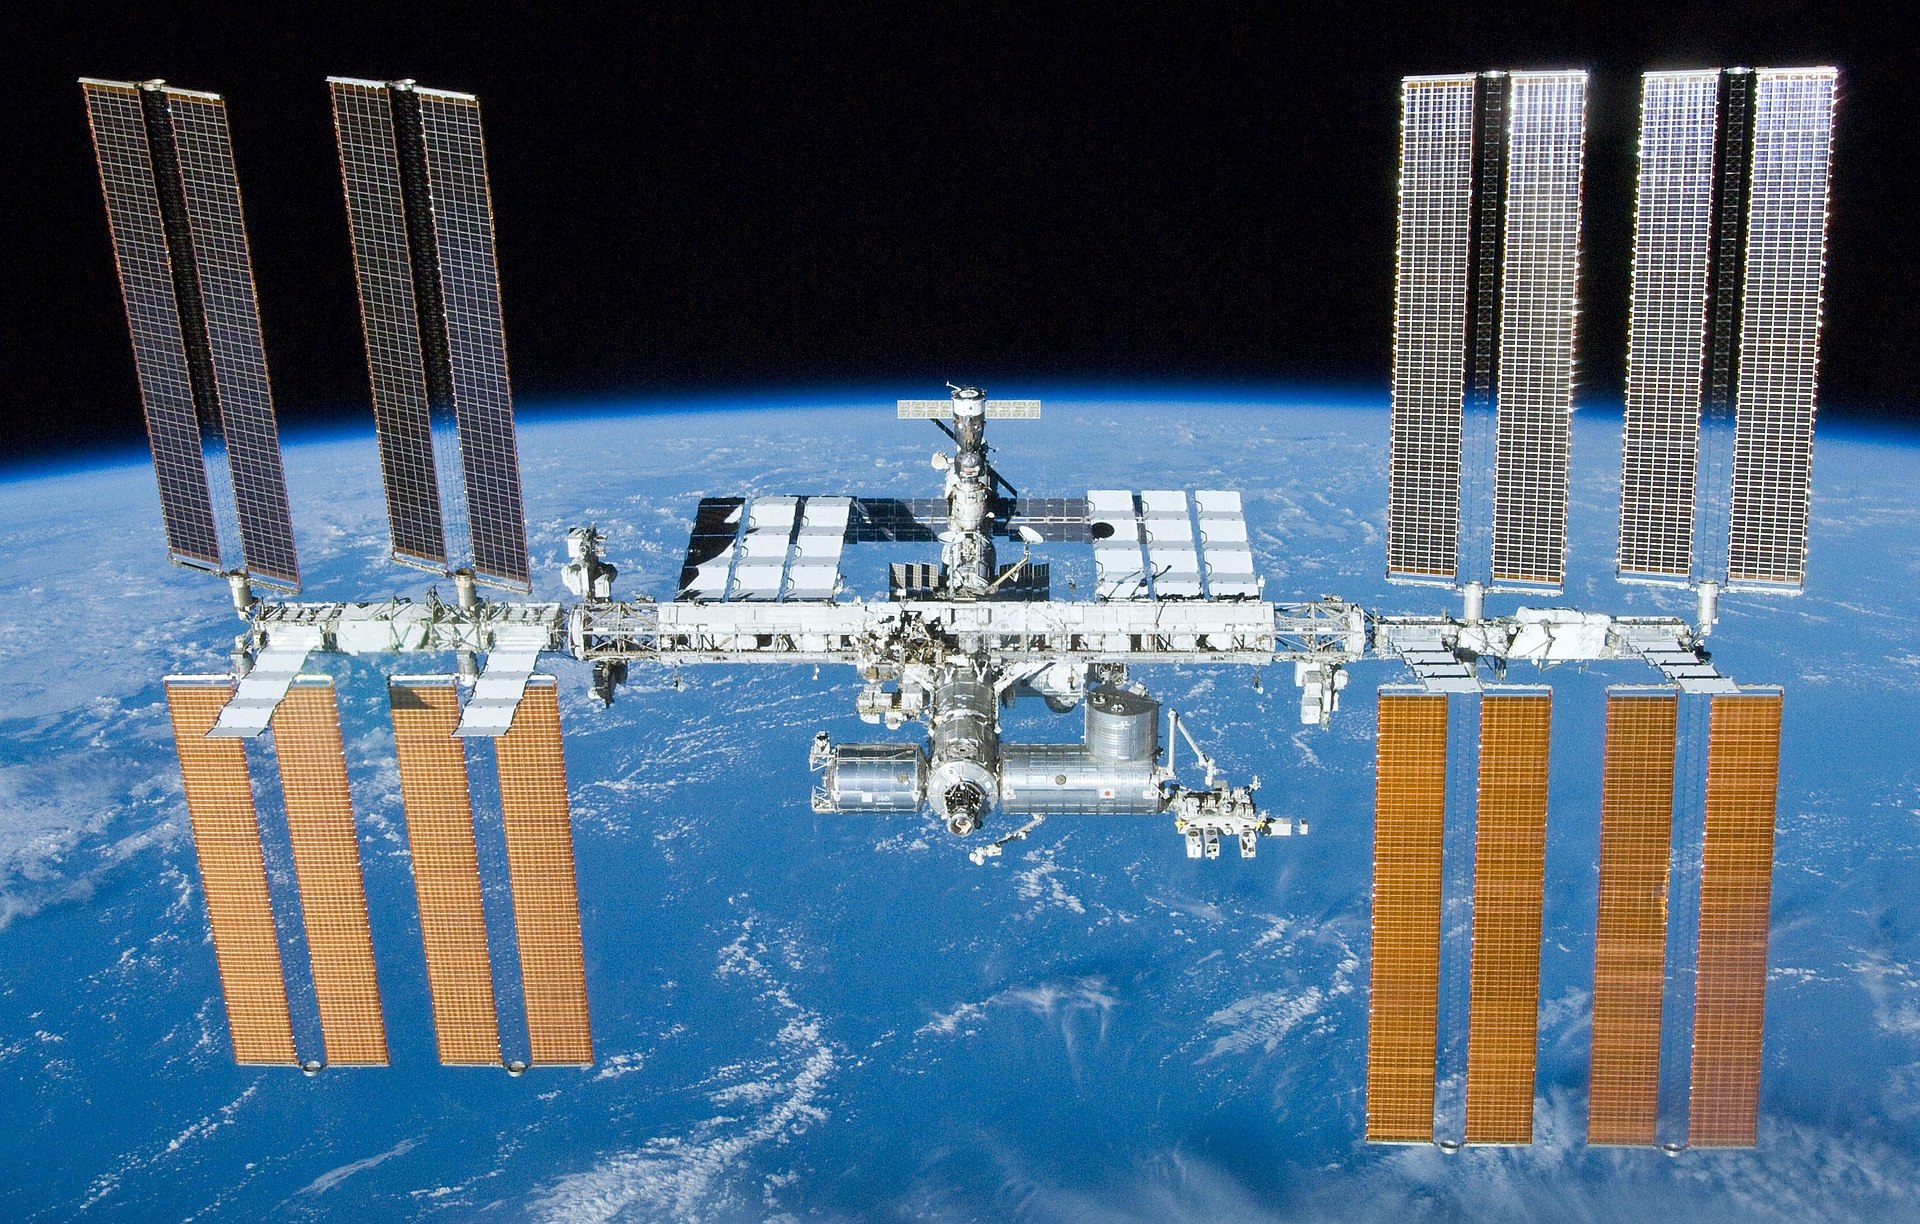 Mark your calendars: tune in to an exclusive in-flight space event with NASA's ISS - Society for Science